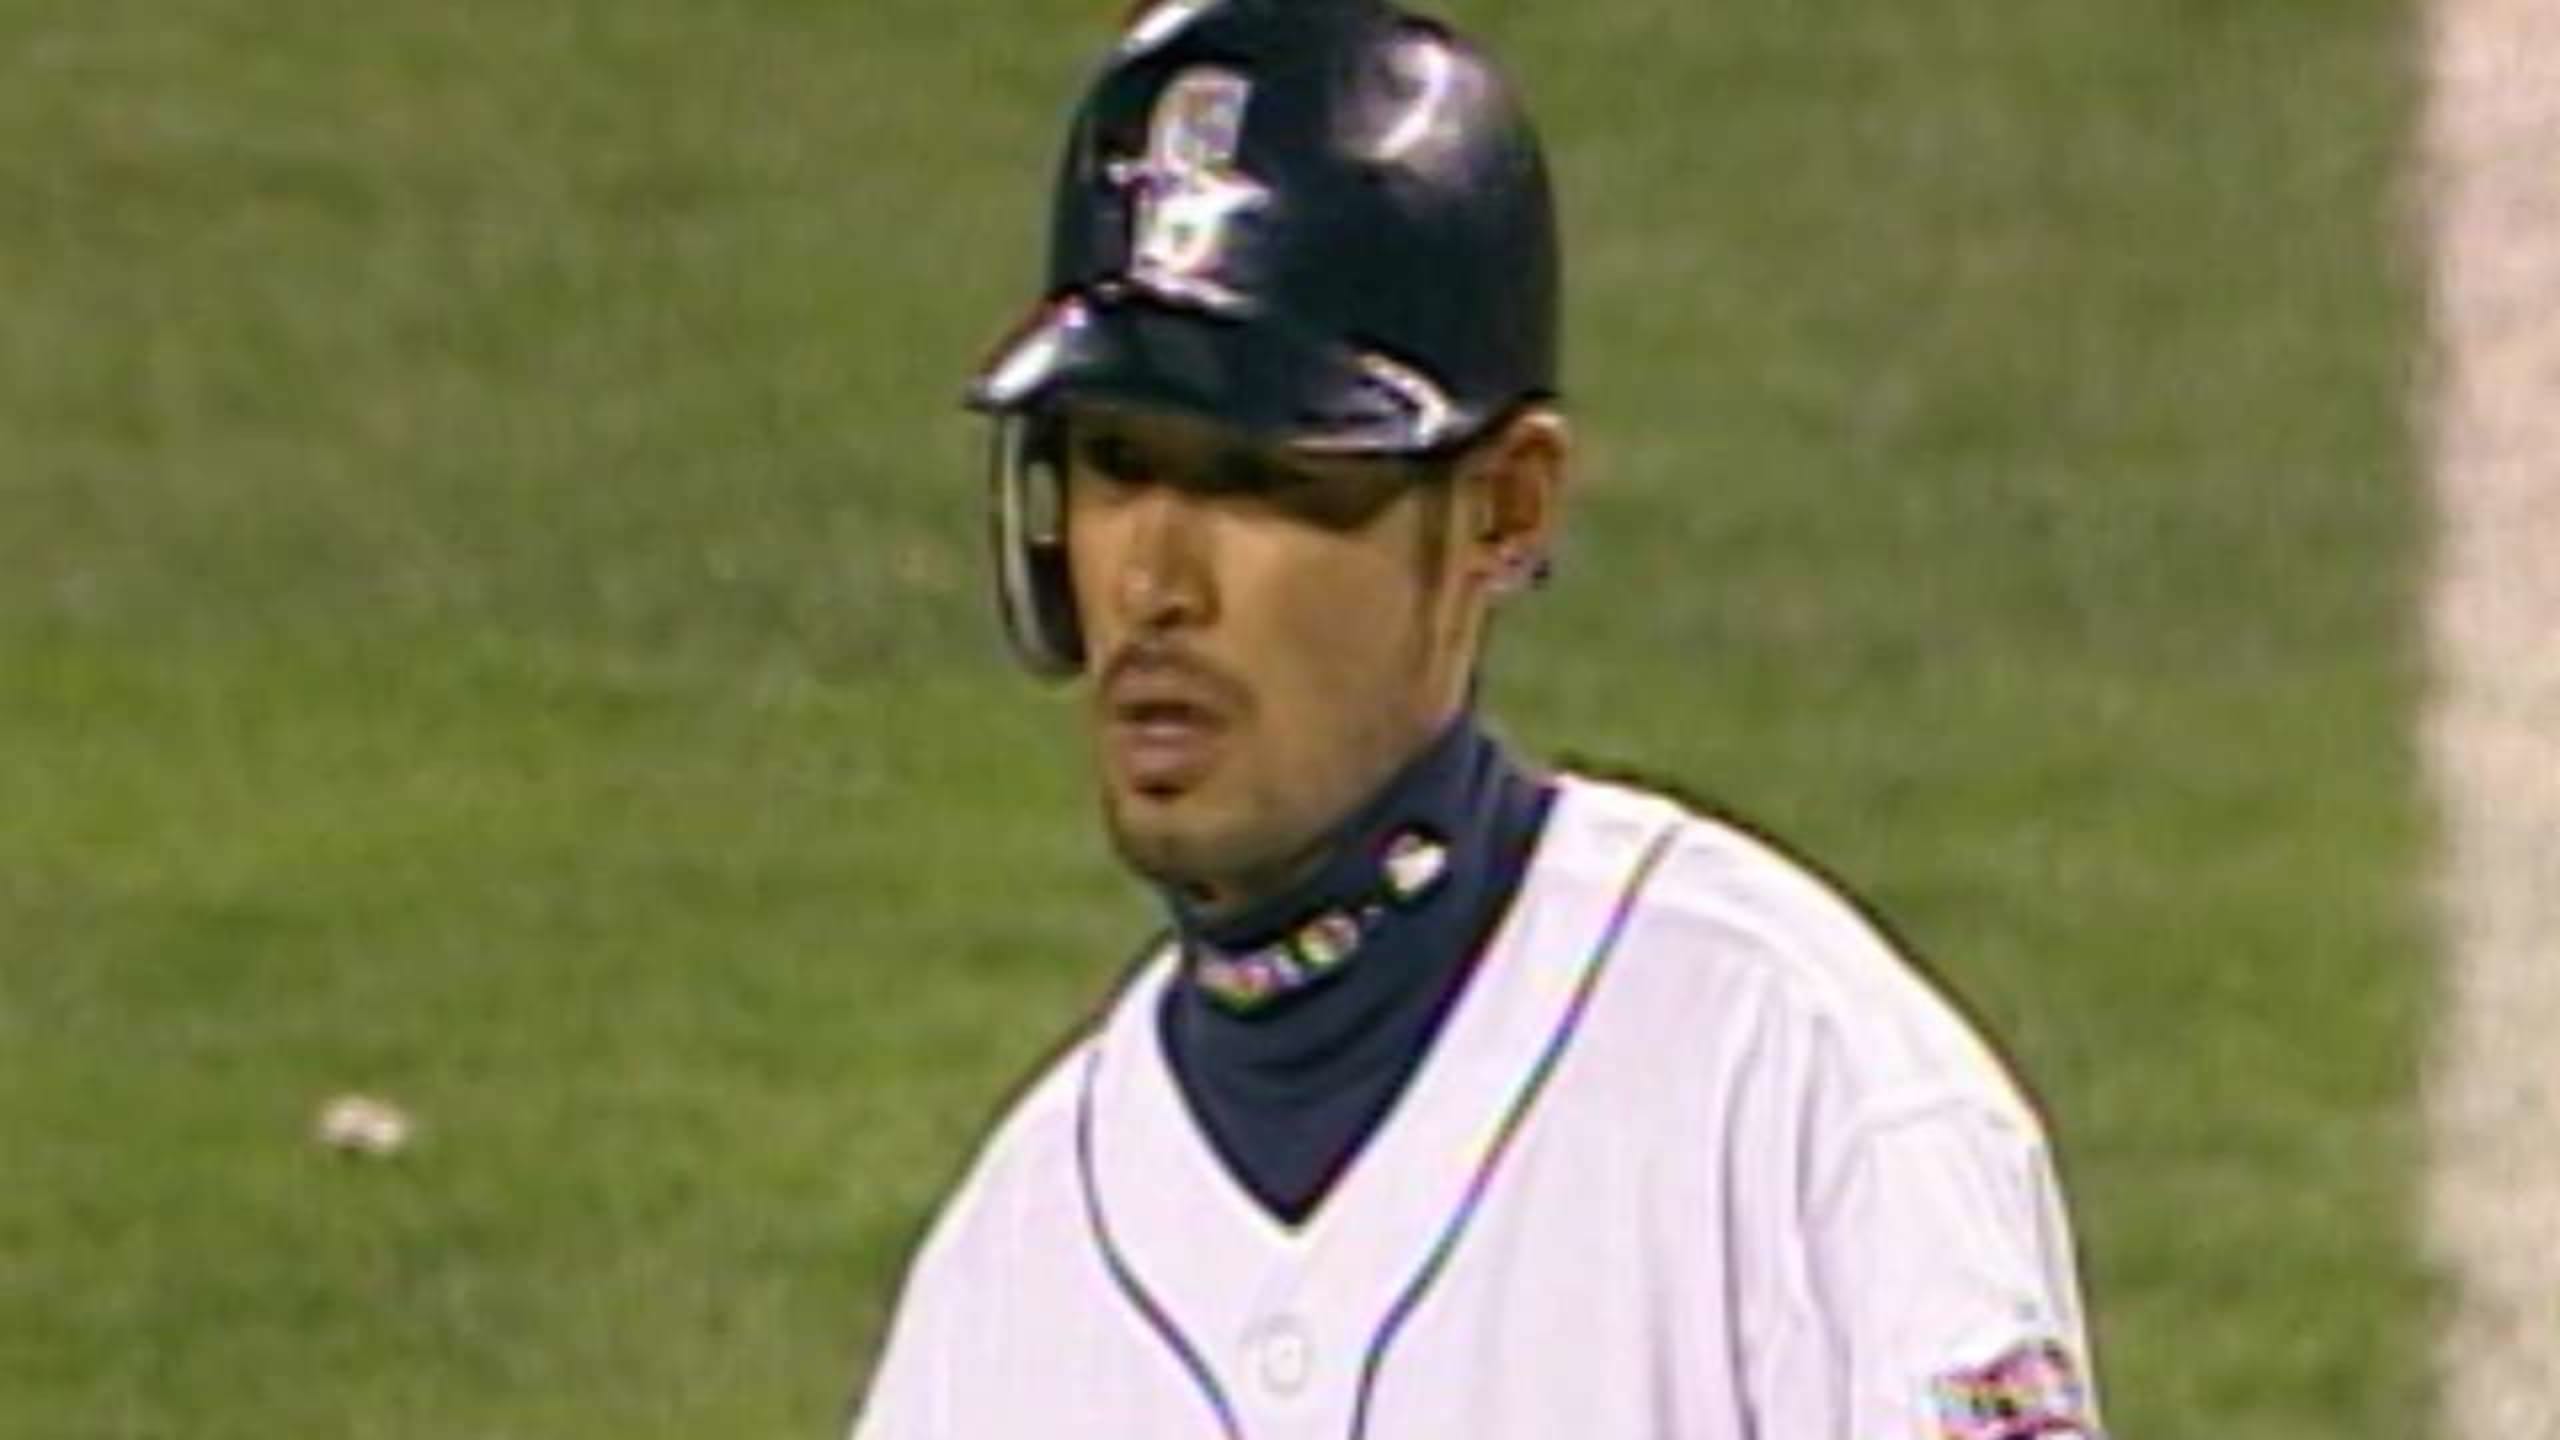 A Superstar Like No Other: An Ode to the Unique Brilliance of Ichiro